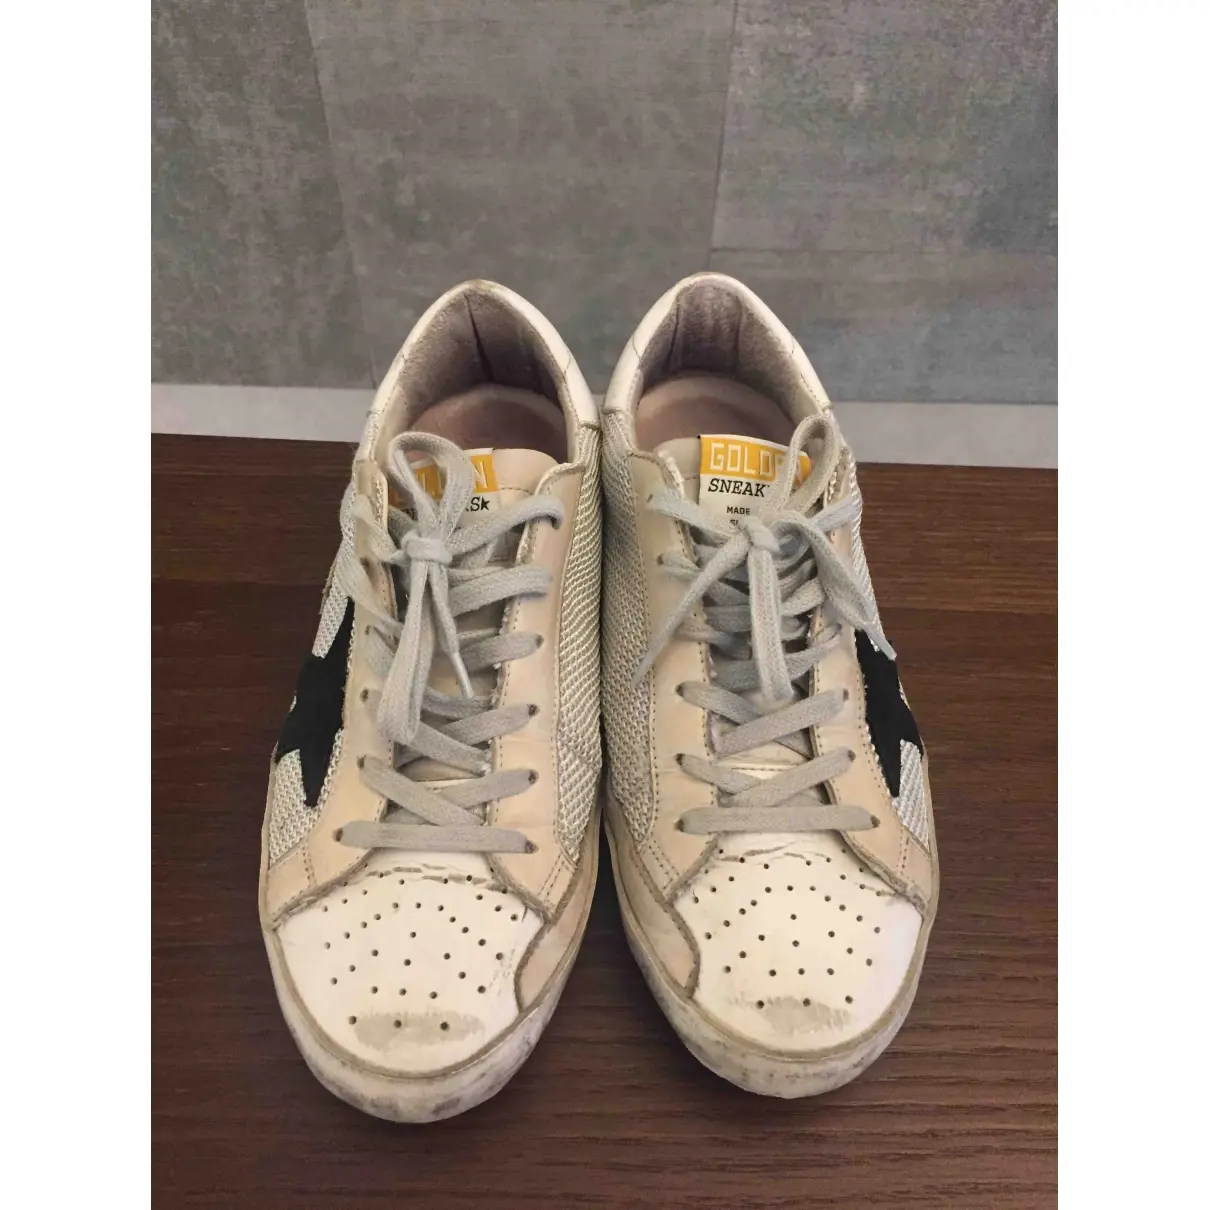 Golden Goose Superstar leather trainers for sale